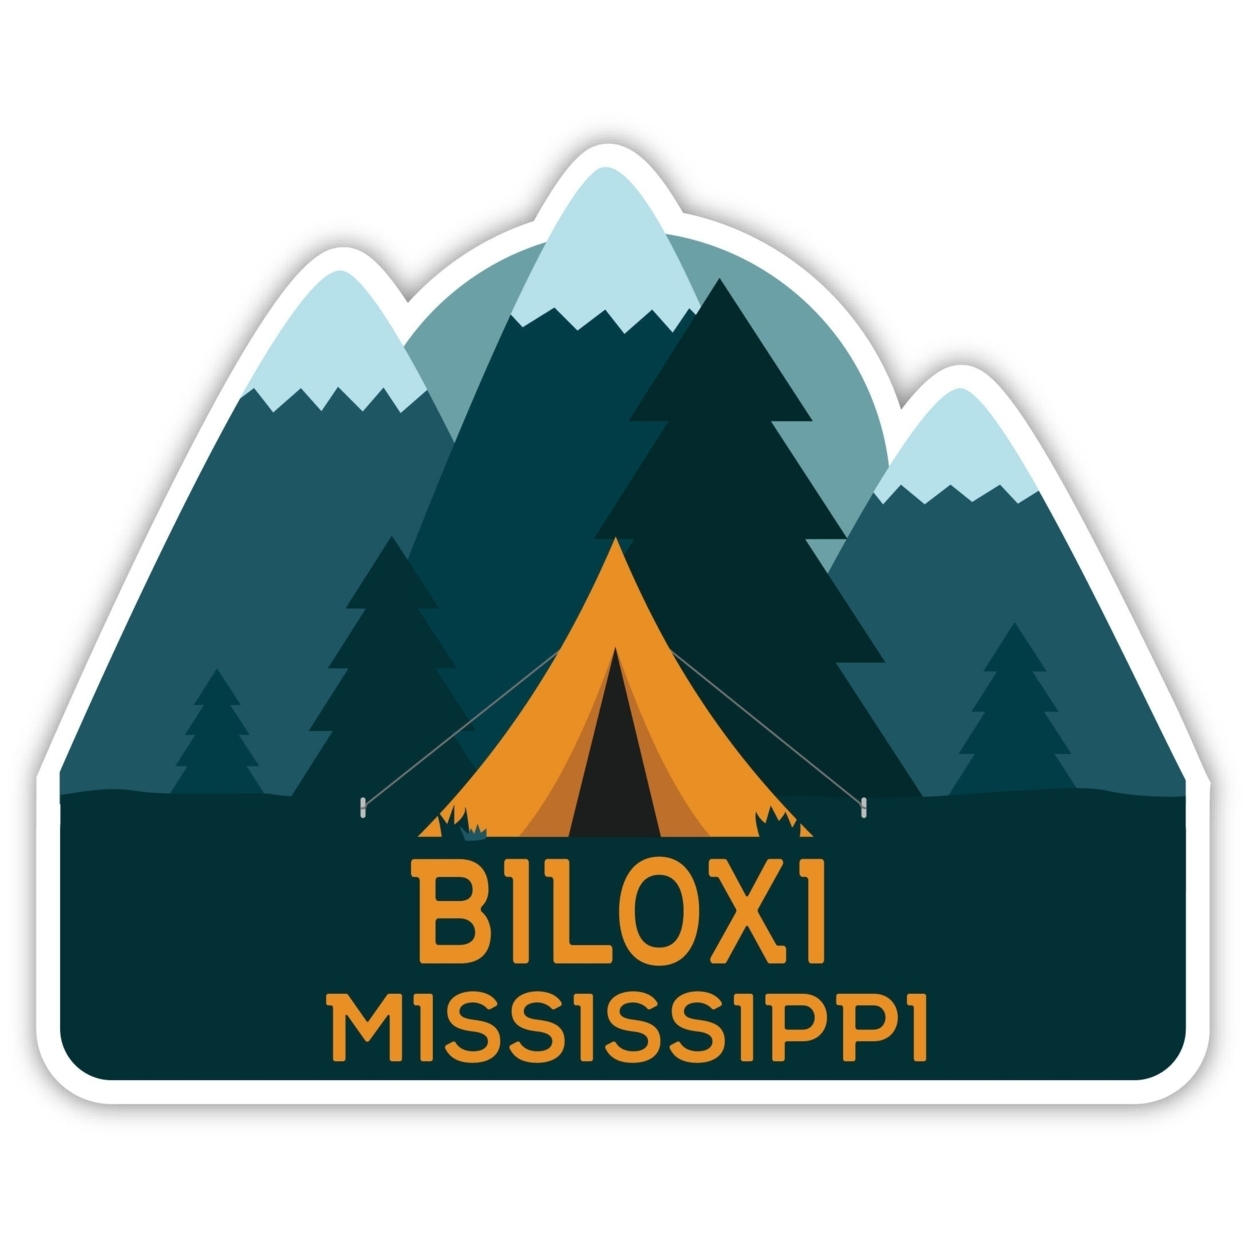 Biloxi Mississippi Souvenir Decorative Stickers (Choose Theme And Size) - 4-Pack, 4-Inch, Bear